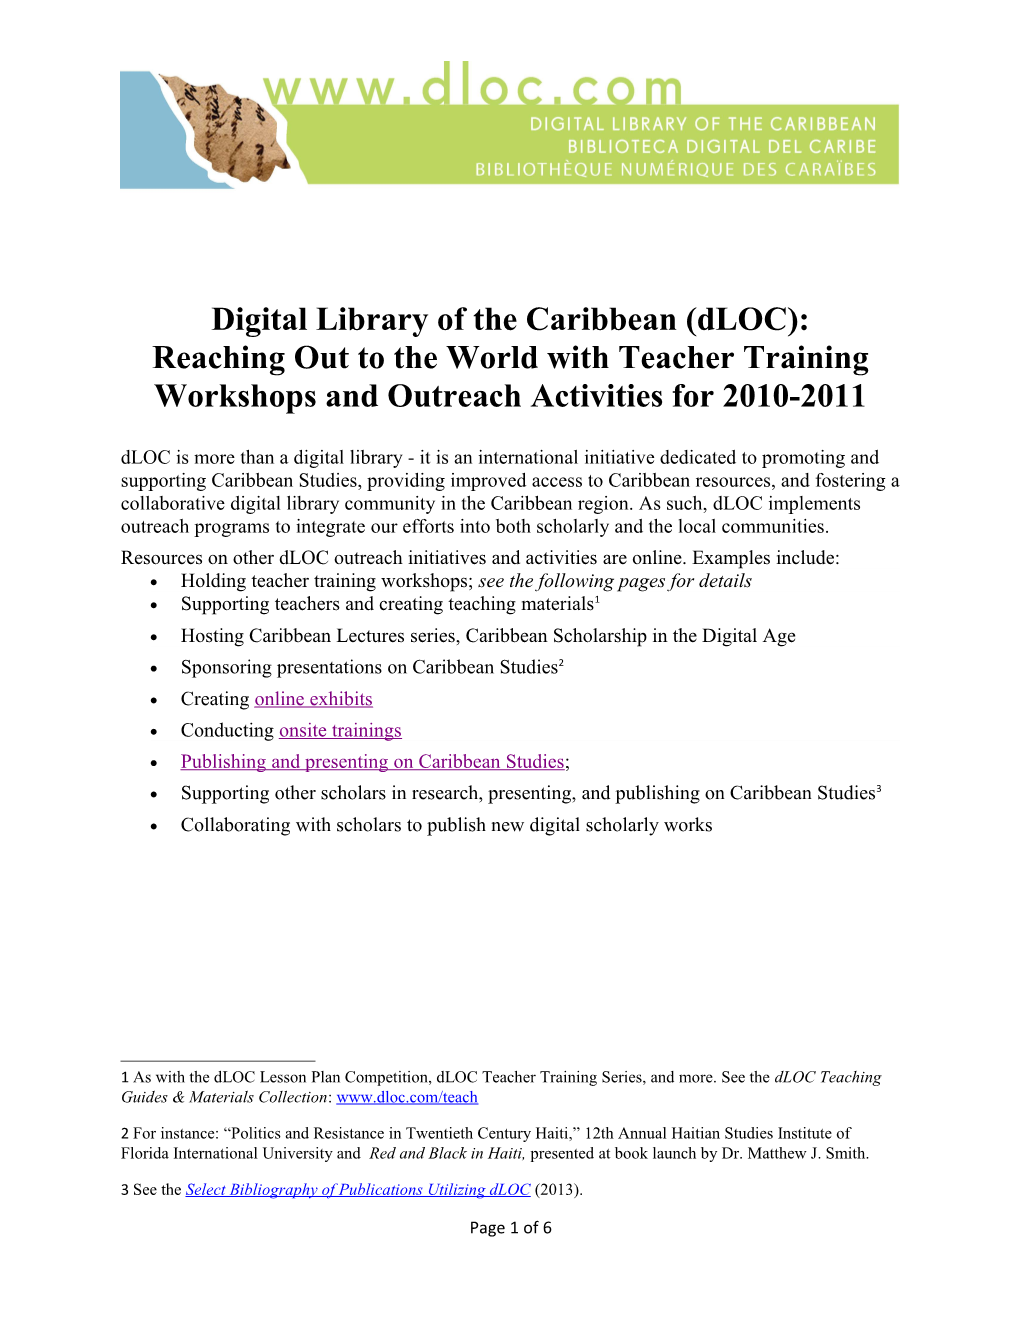 Digital Library of the Caribbean (Dloc): Reaching out to the World Withteacher Training